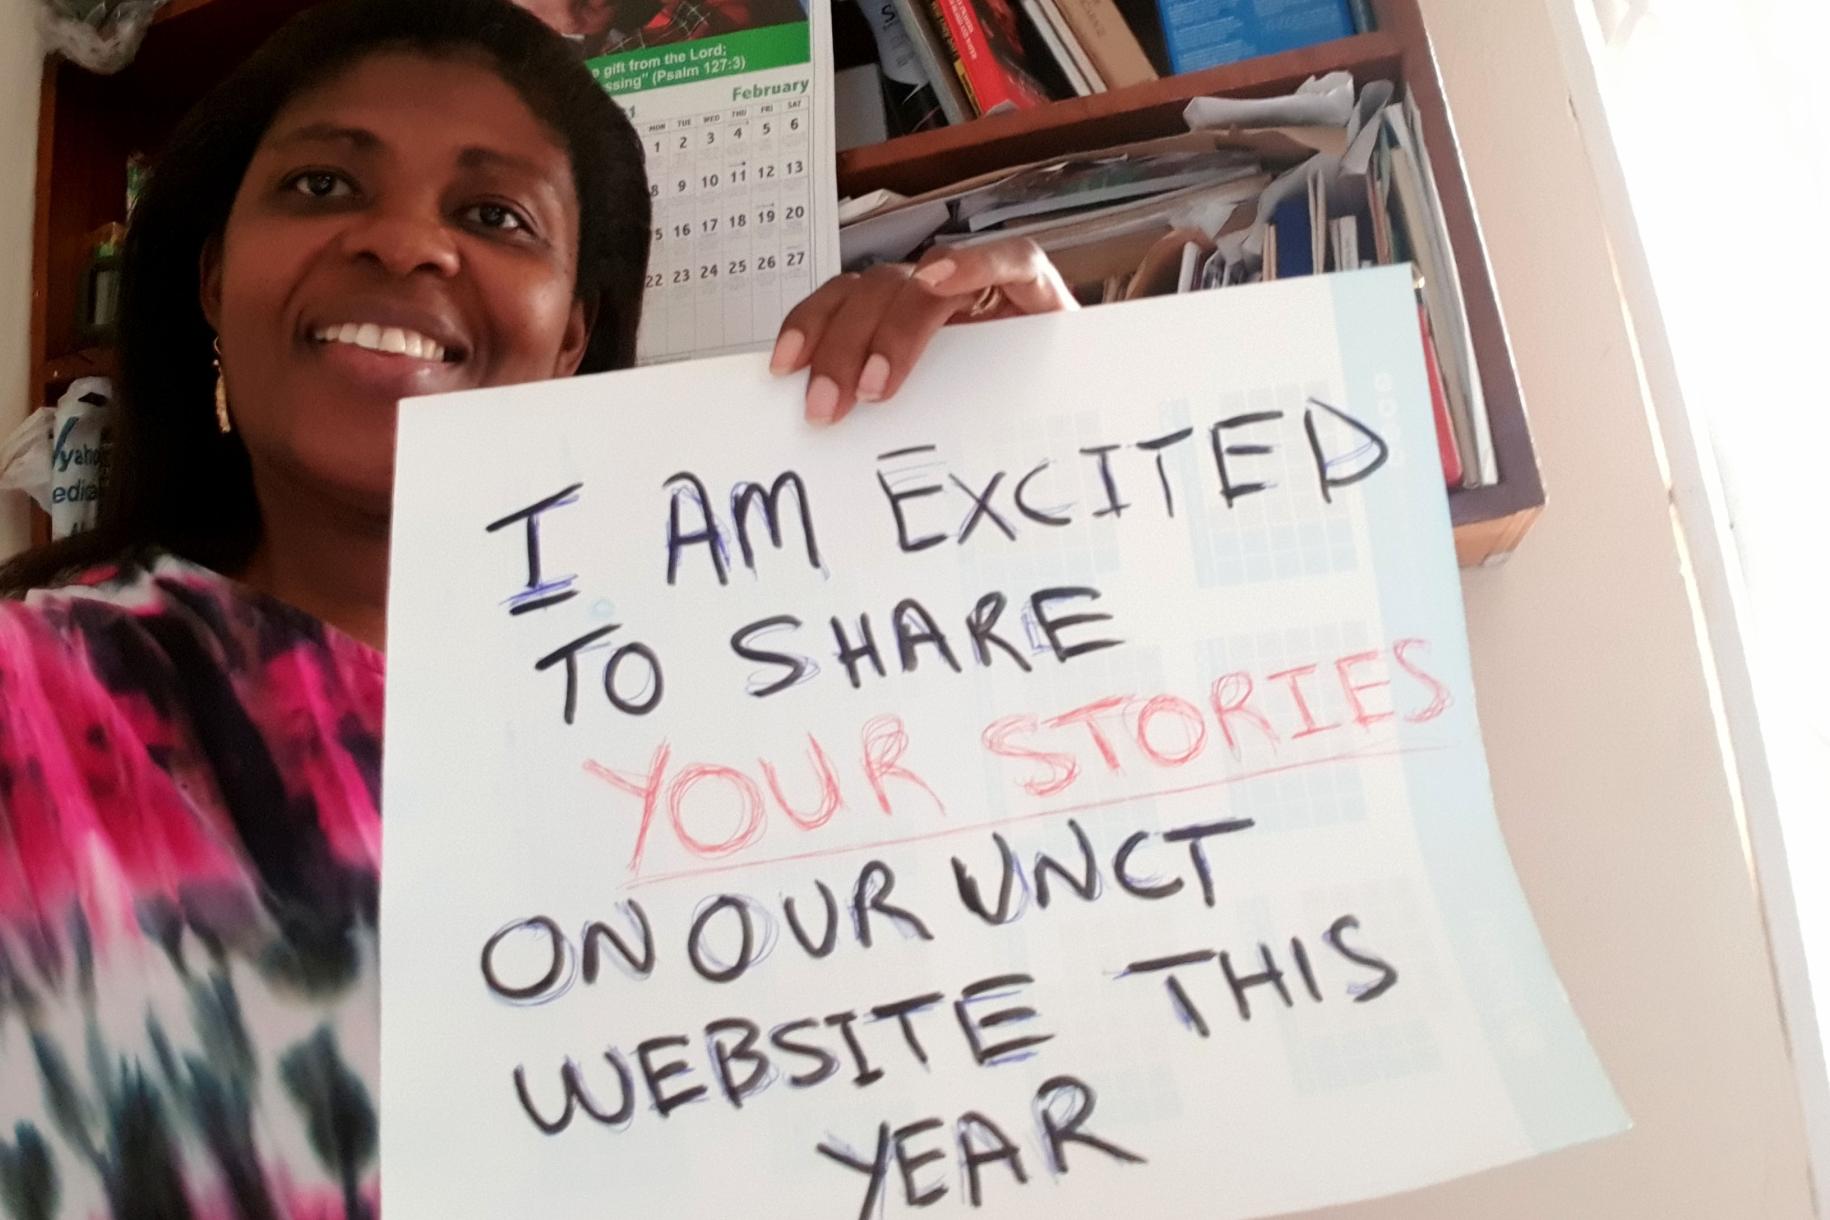 Cynthia Prah of UN Ghana proudly holds up a sign that reads, " I am excited to share your stories on our UNCT website this year!"